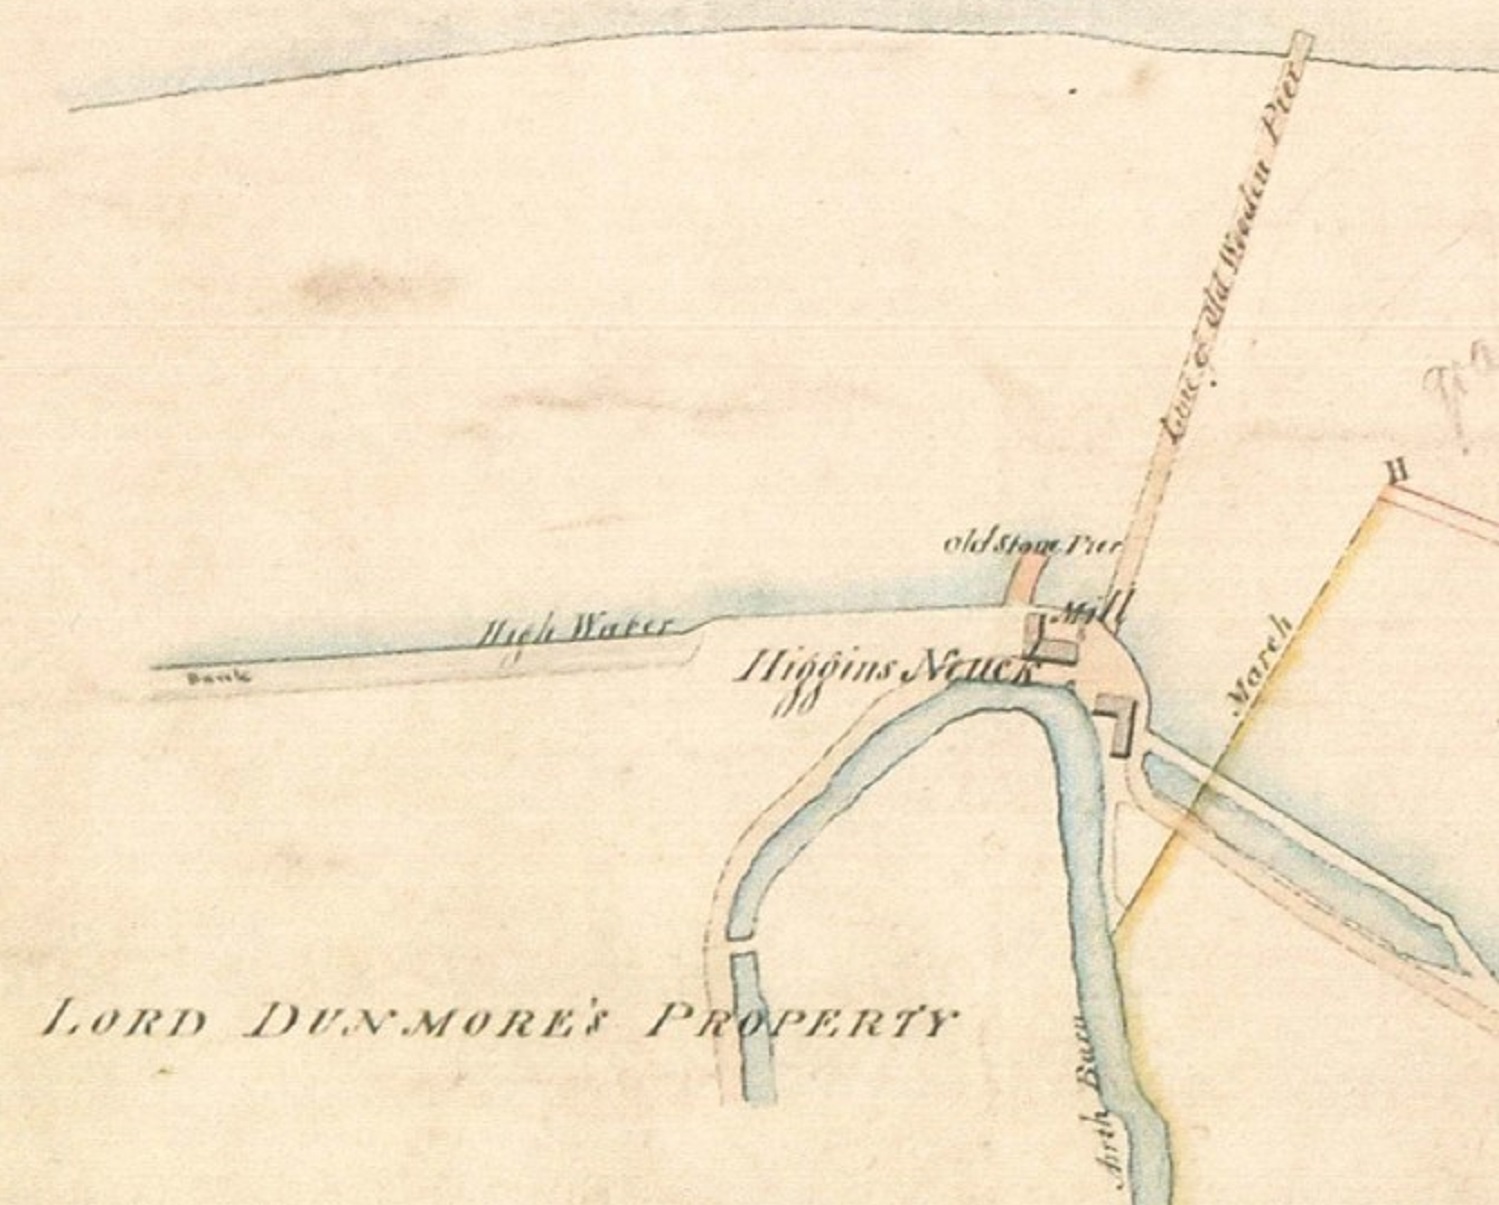 1828 map which shows two buildings, two old piers and a watercourse